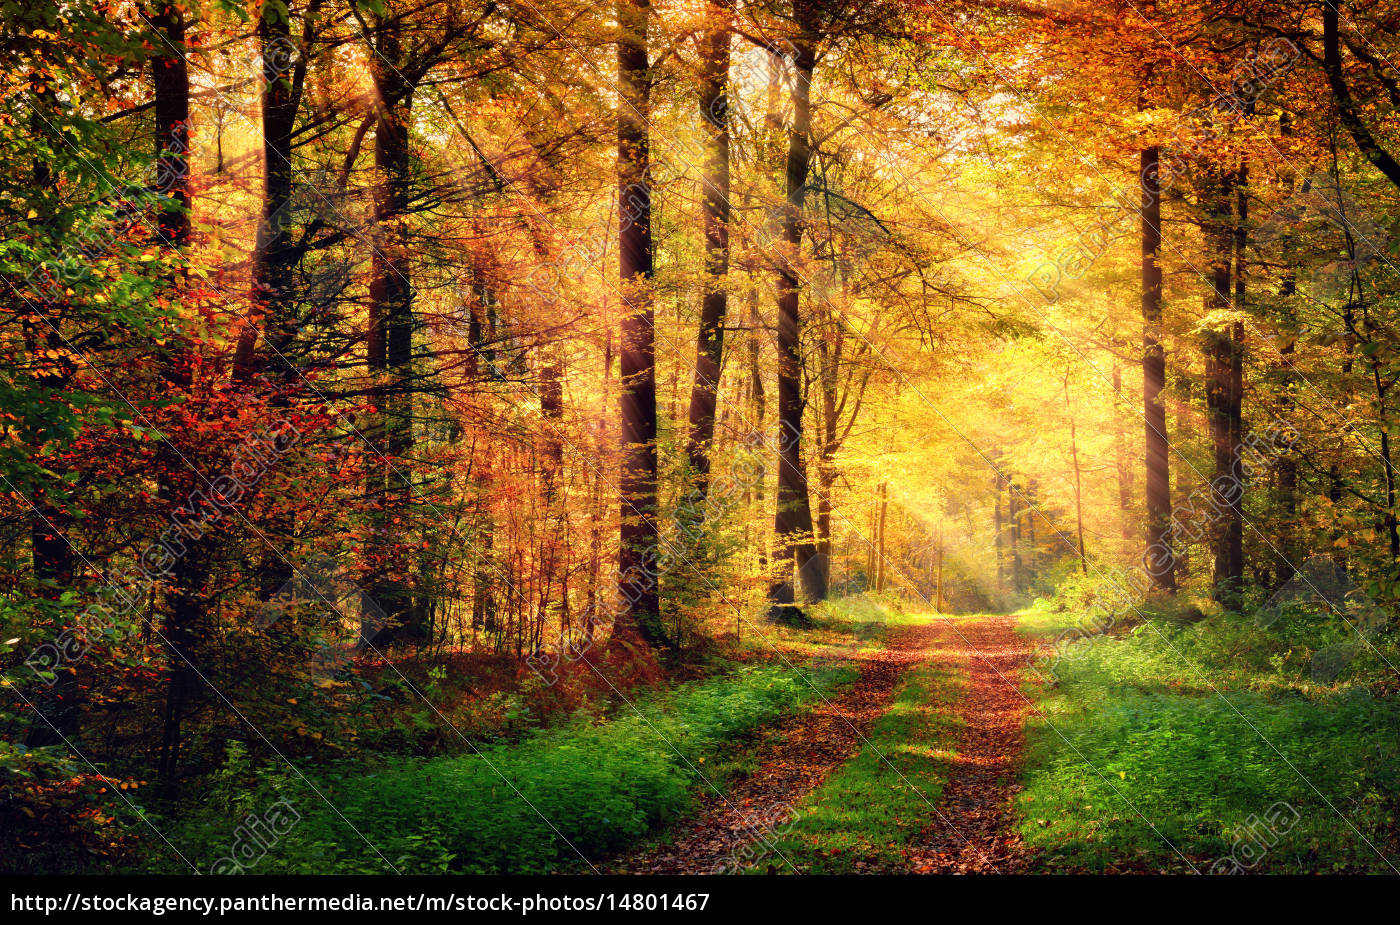 Autumn Winter Forest: Over 46,659 Royalty-Free Licensable Stock